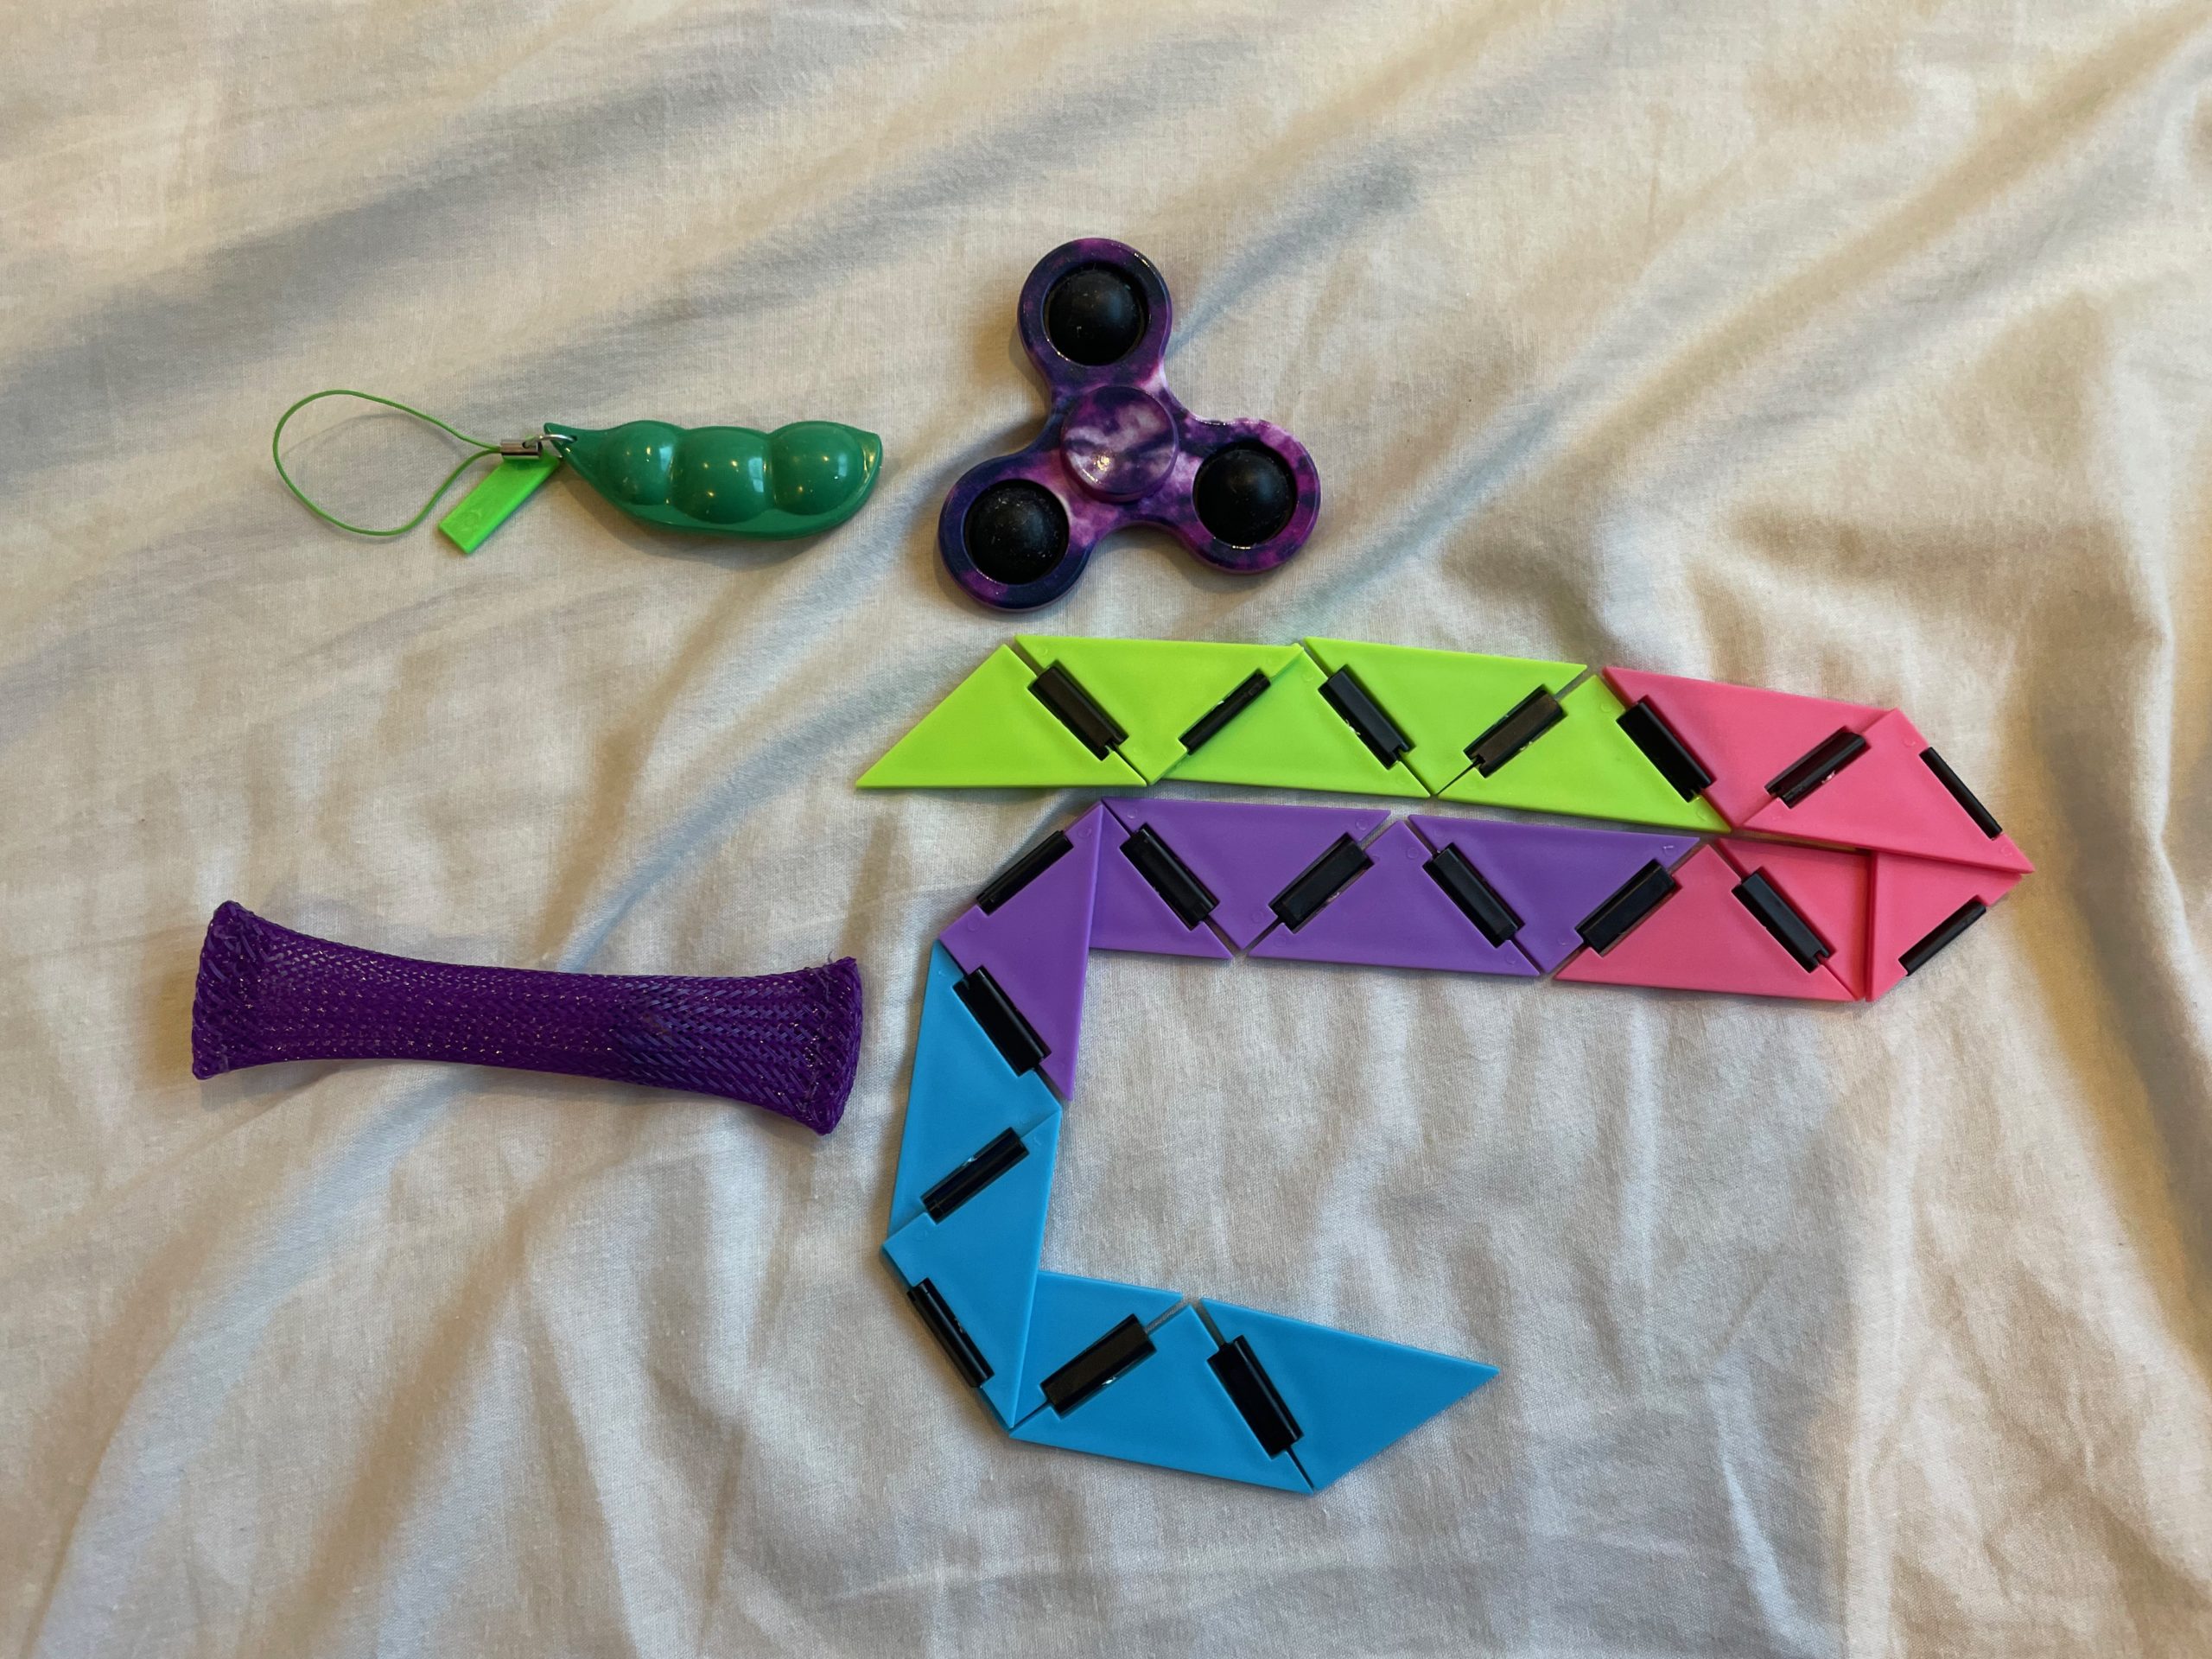 Four fidget toys lie on a grey bedsheet. They are green peas in a pod, a purple fidget spinner, a snake-like multicoloured toy and a purple mesh tube.